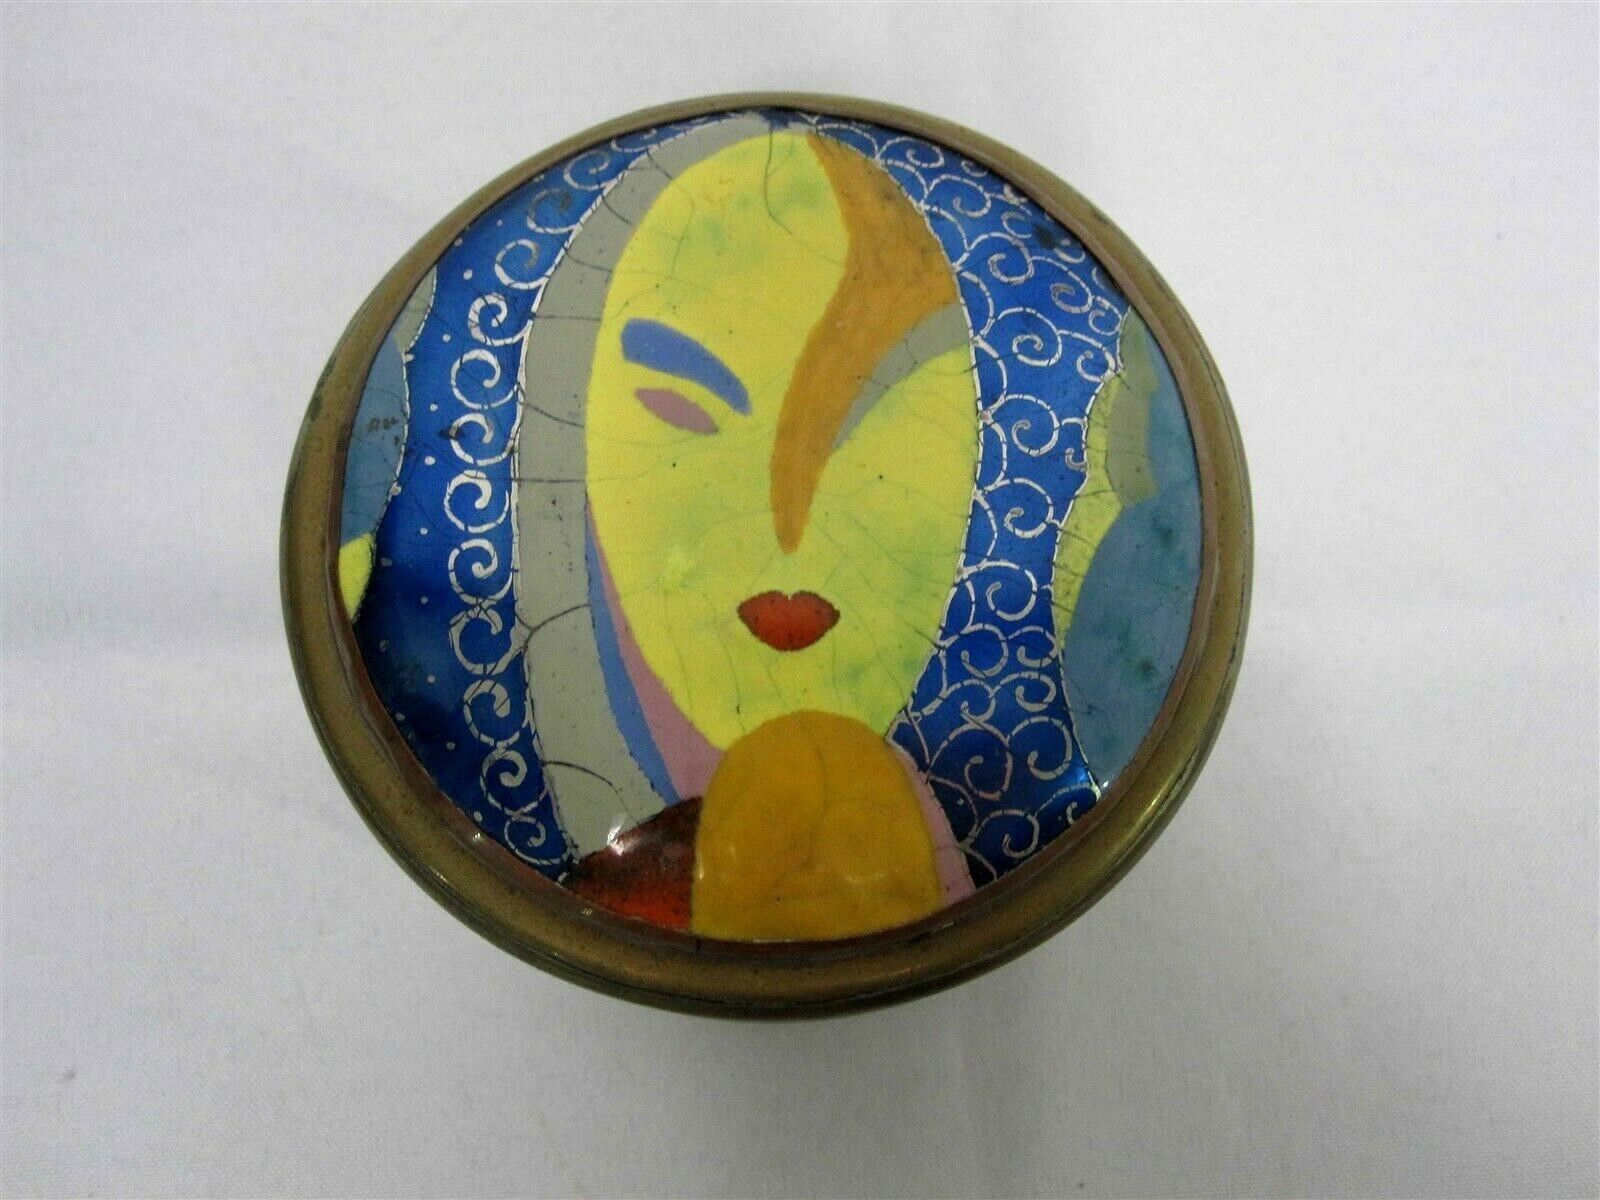 MID CENTURY HAND PAINTED ENAMEL ON COPPER CORK LINED HUMIDOR TOBACCO JAR BOX